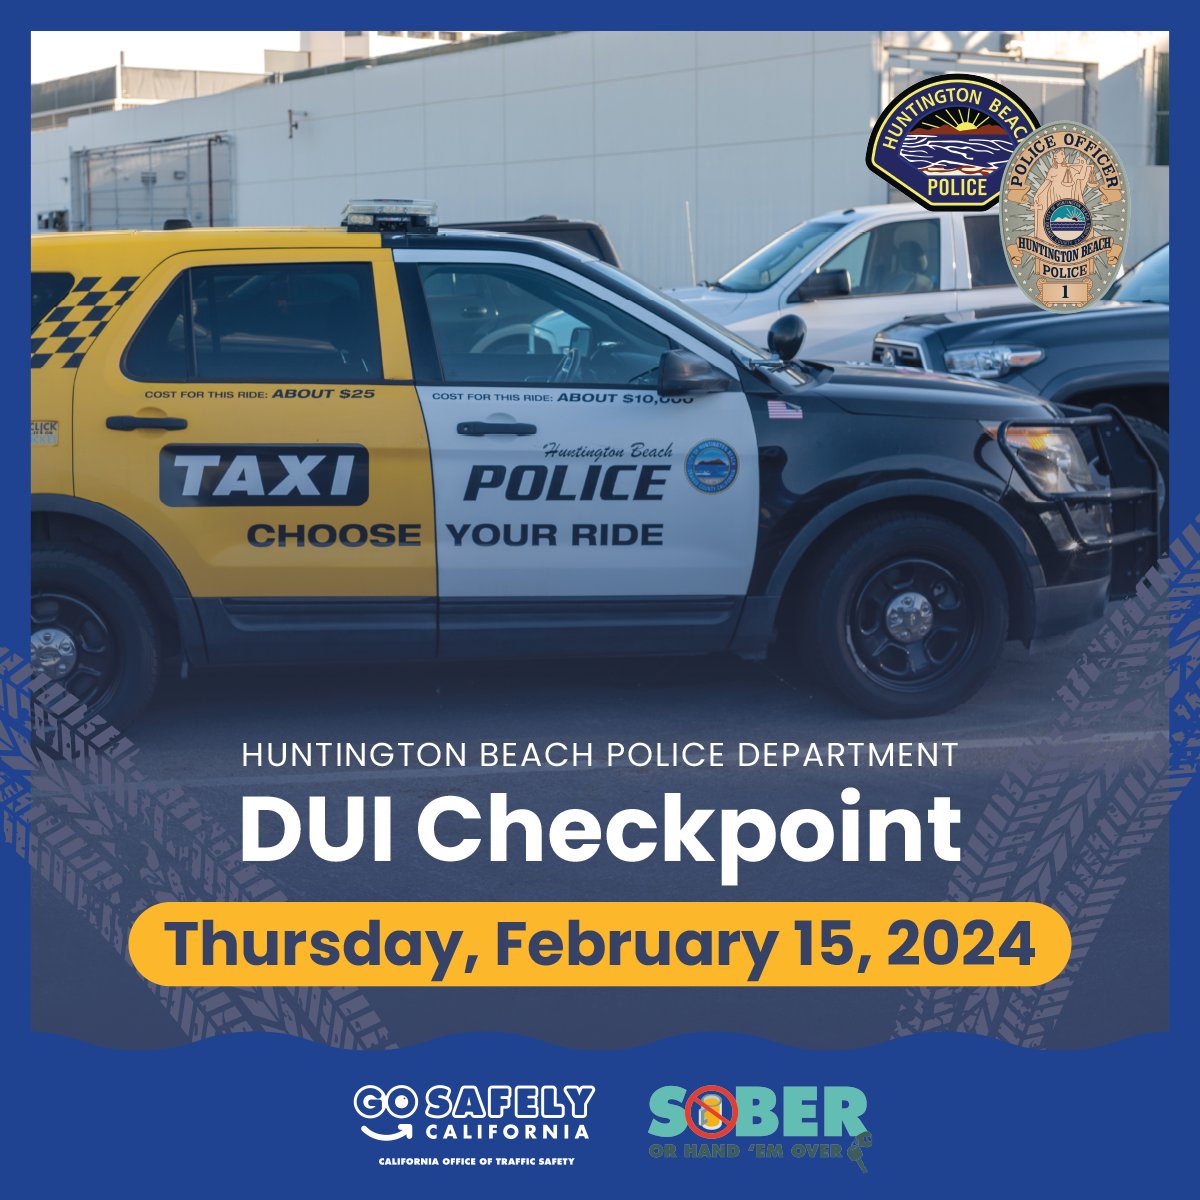 The HBPD will conduct a DUI checkpoint on 2/15, between 6 pm & 2 am, within the City limits. The location has been selected based on DUI crash & arrest statistics. The NHTSA provided funding for the checkpoint. For the press release, visit bit.ly/HBPDPressRelea….